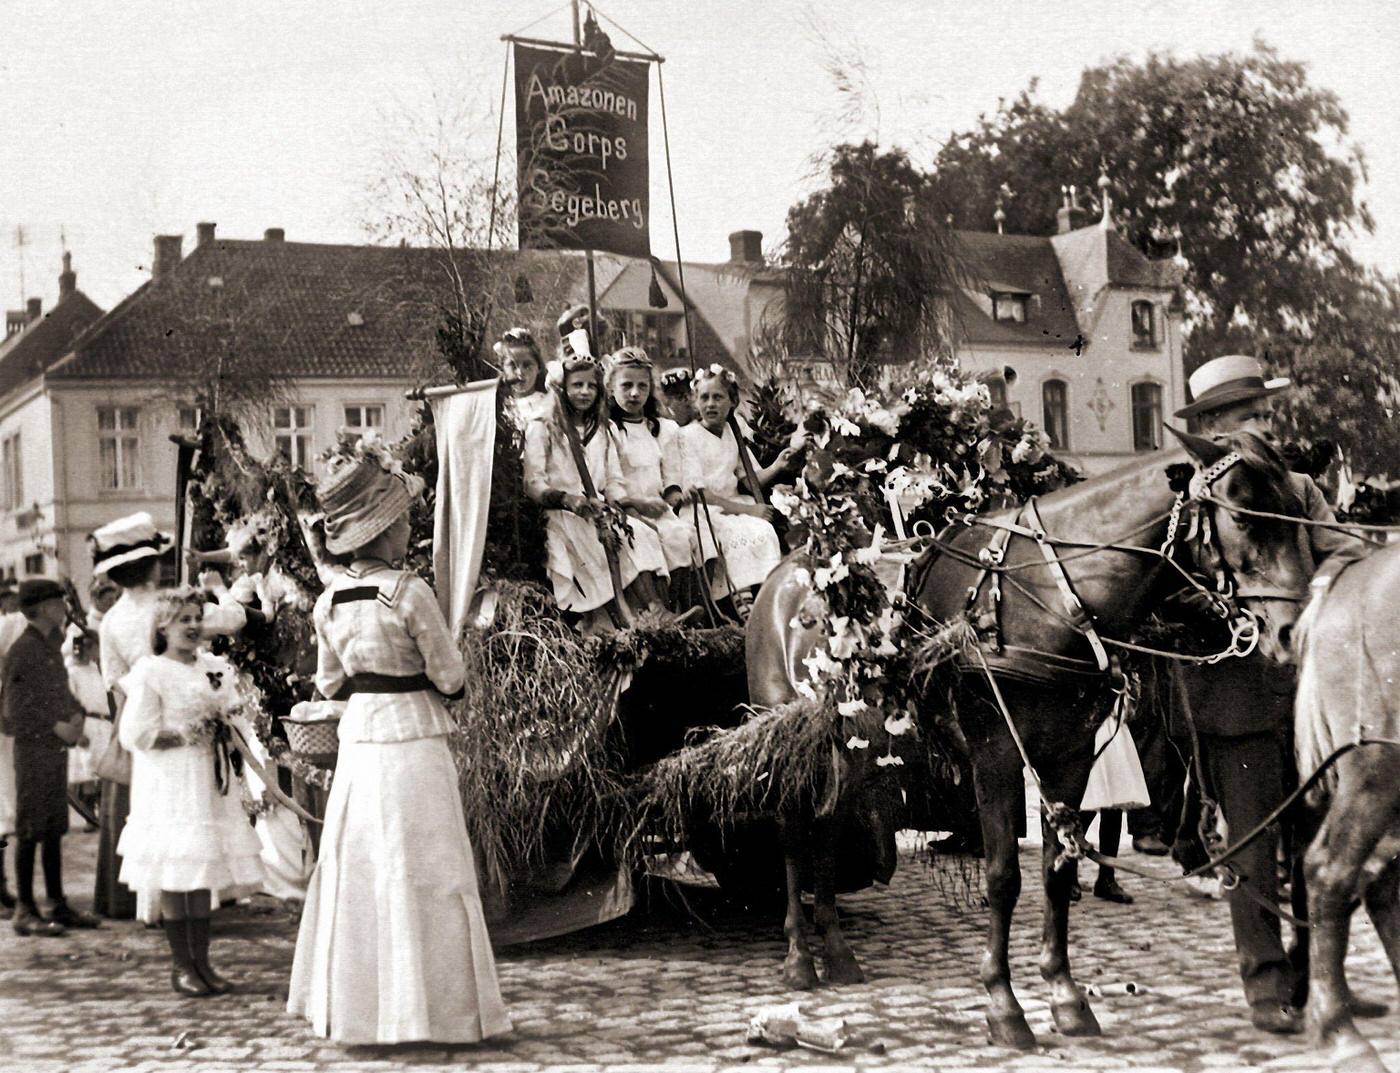 Procession at Segenberg with children, horses, and carriage in Hamburg, Germany, 1910